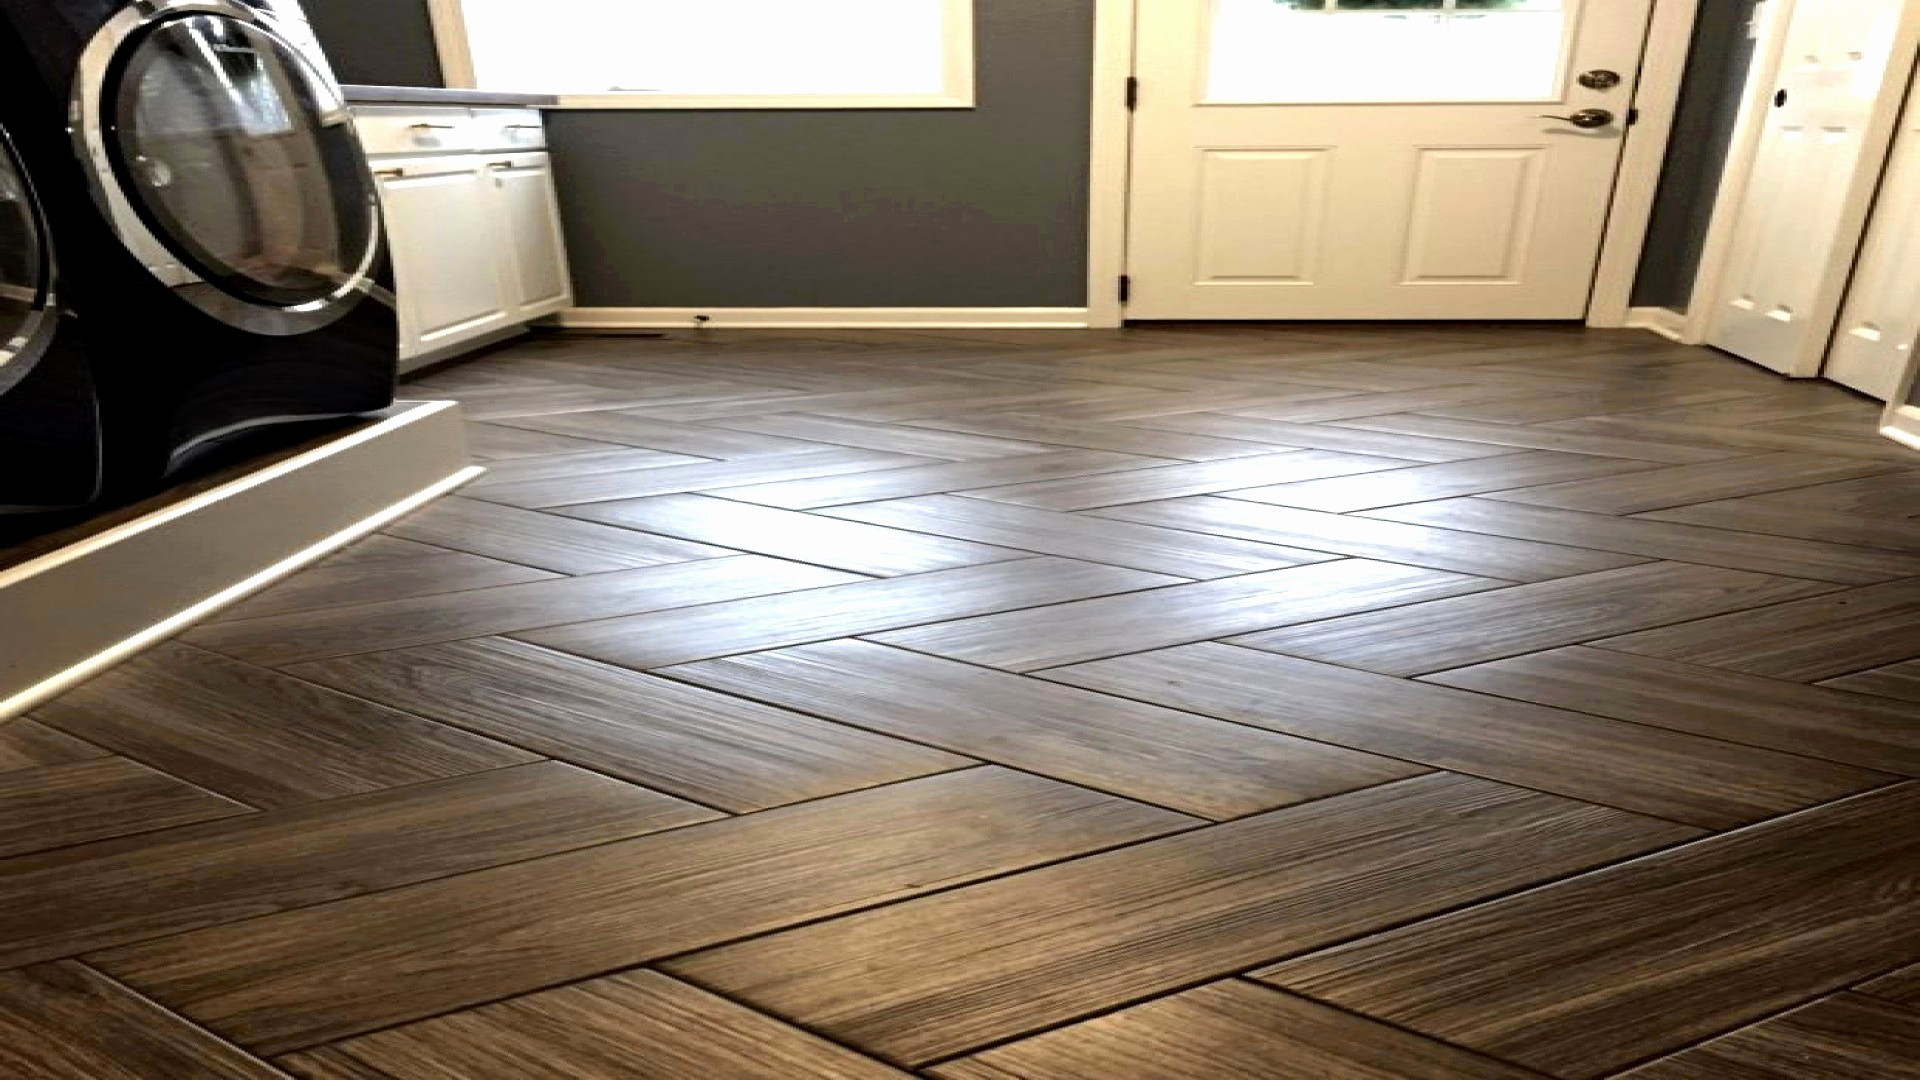 21 Nice Types Of Hardwood Floors Pictures 2024 free download types of hardwood floors pictures of 19 awesome hardwood flooring for sale photograph dizpos com within hardwood flooring for sale best of 52 luxury wood flooring sale 52 s photograph